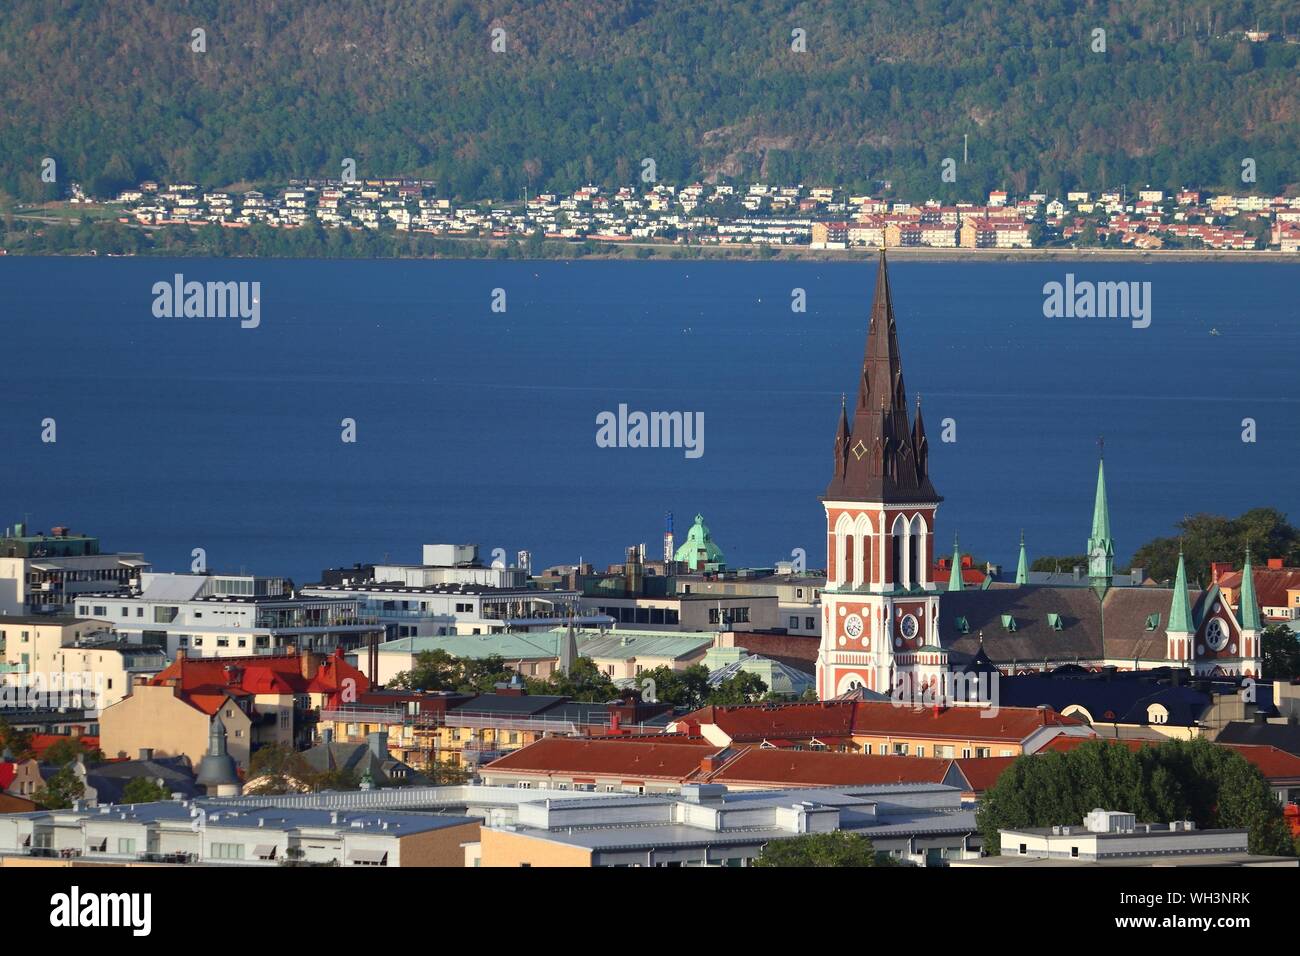 Jonkoping town skyline with lake Vattern in Sweden. Smaland province. Stock Photo